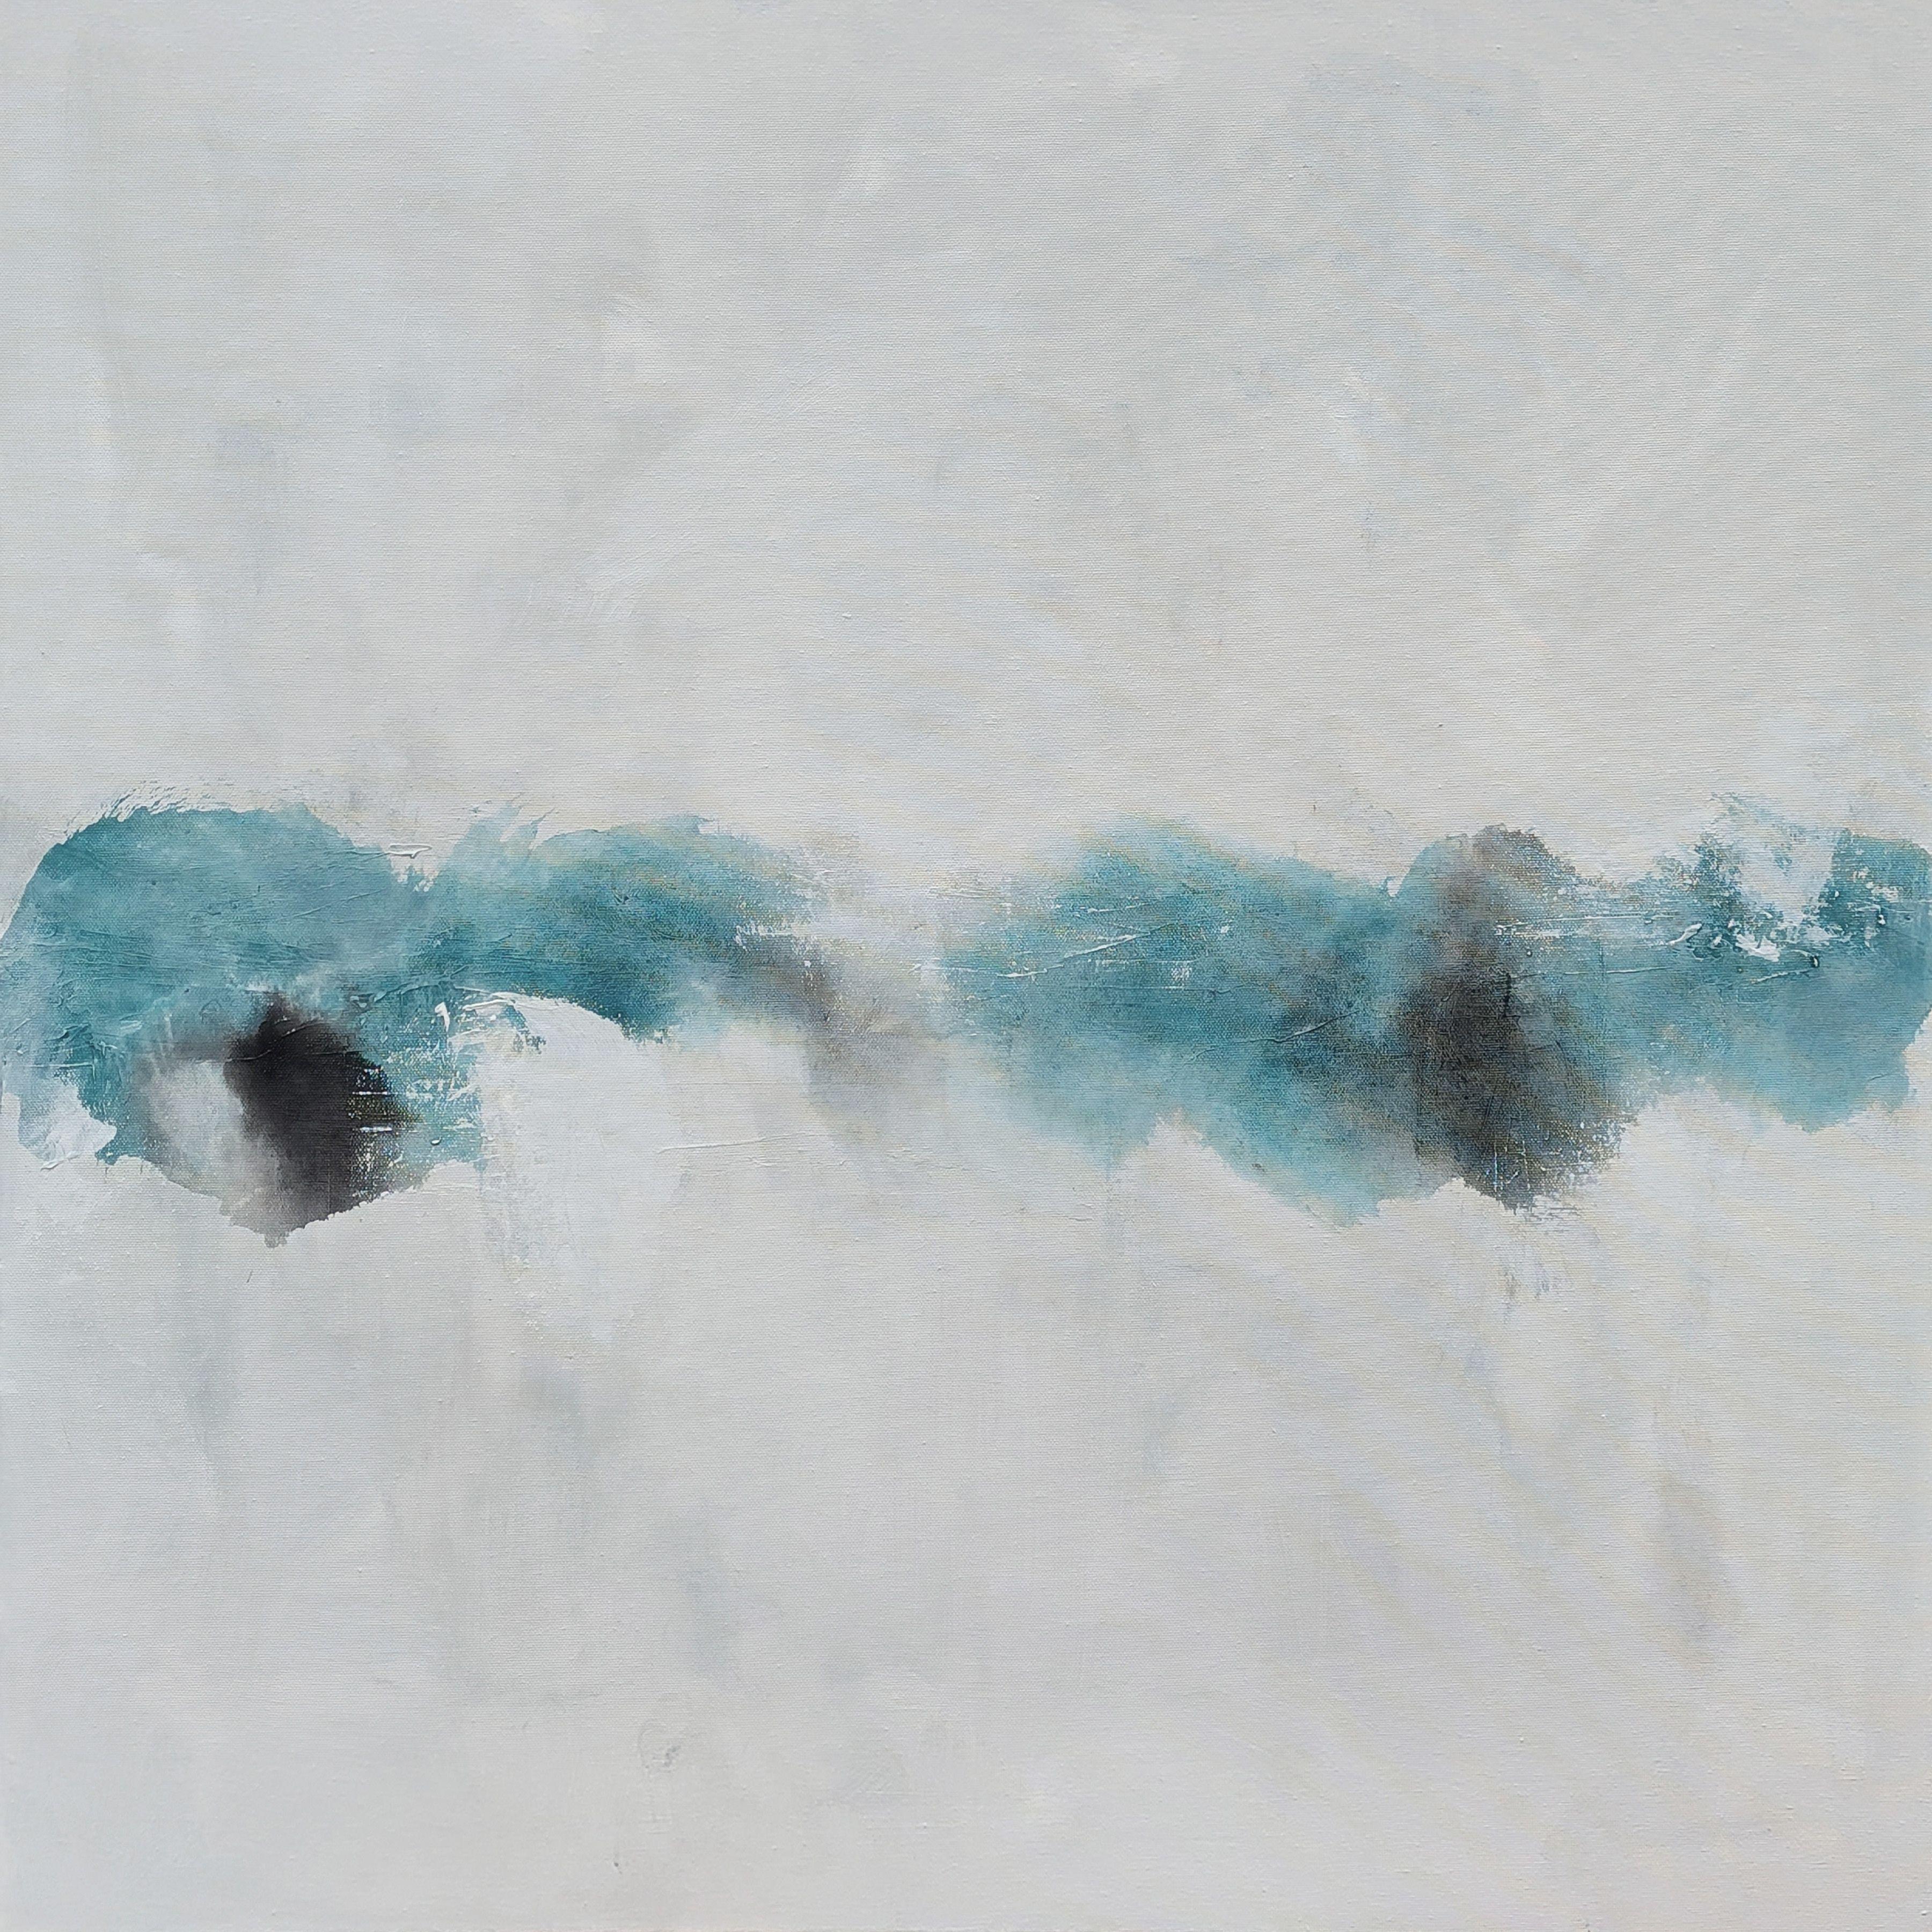 Soften My Edges is an original modern abstract created with acrylics, mediums on stretched canvas. 30" x 30" Lightweight back-stapled canvas - white finished sides. Ready to hang or frame (unframed). Signed on the back, COA included. This modern